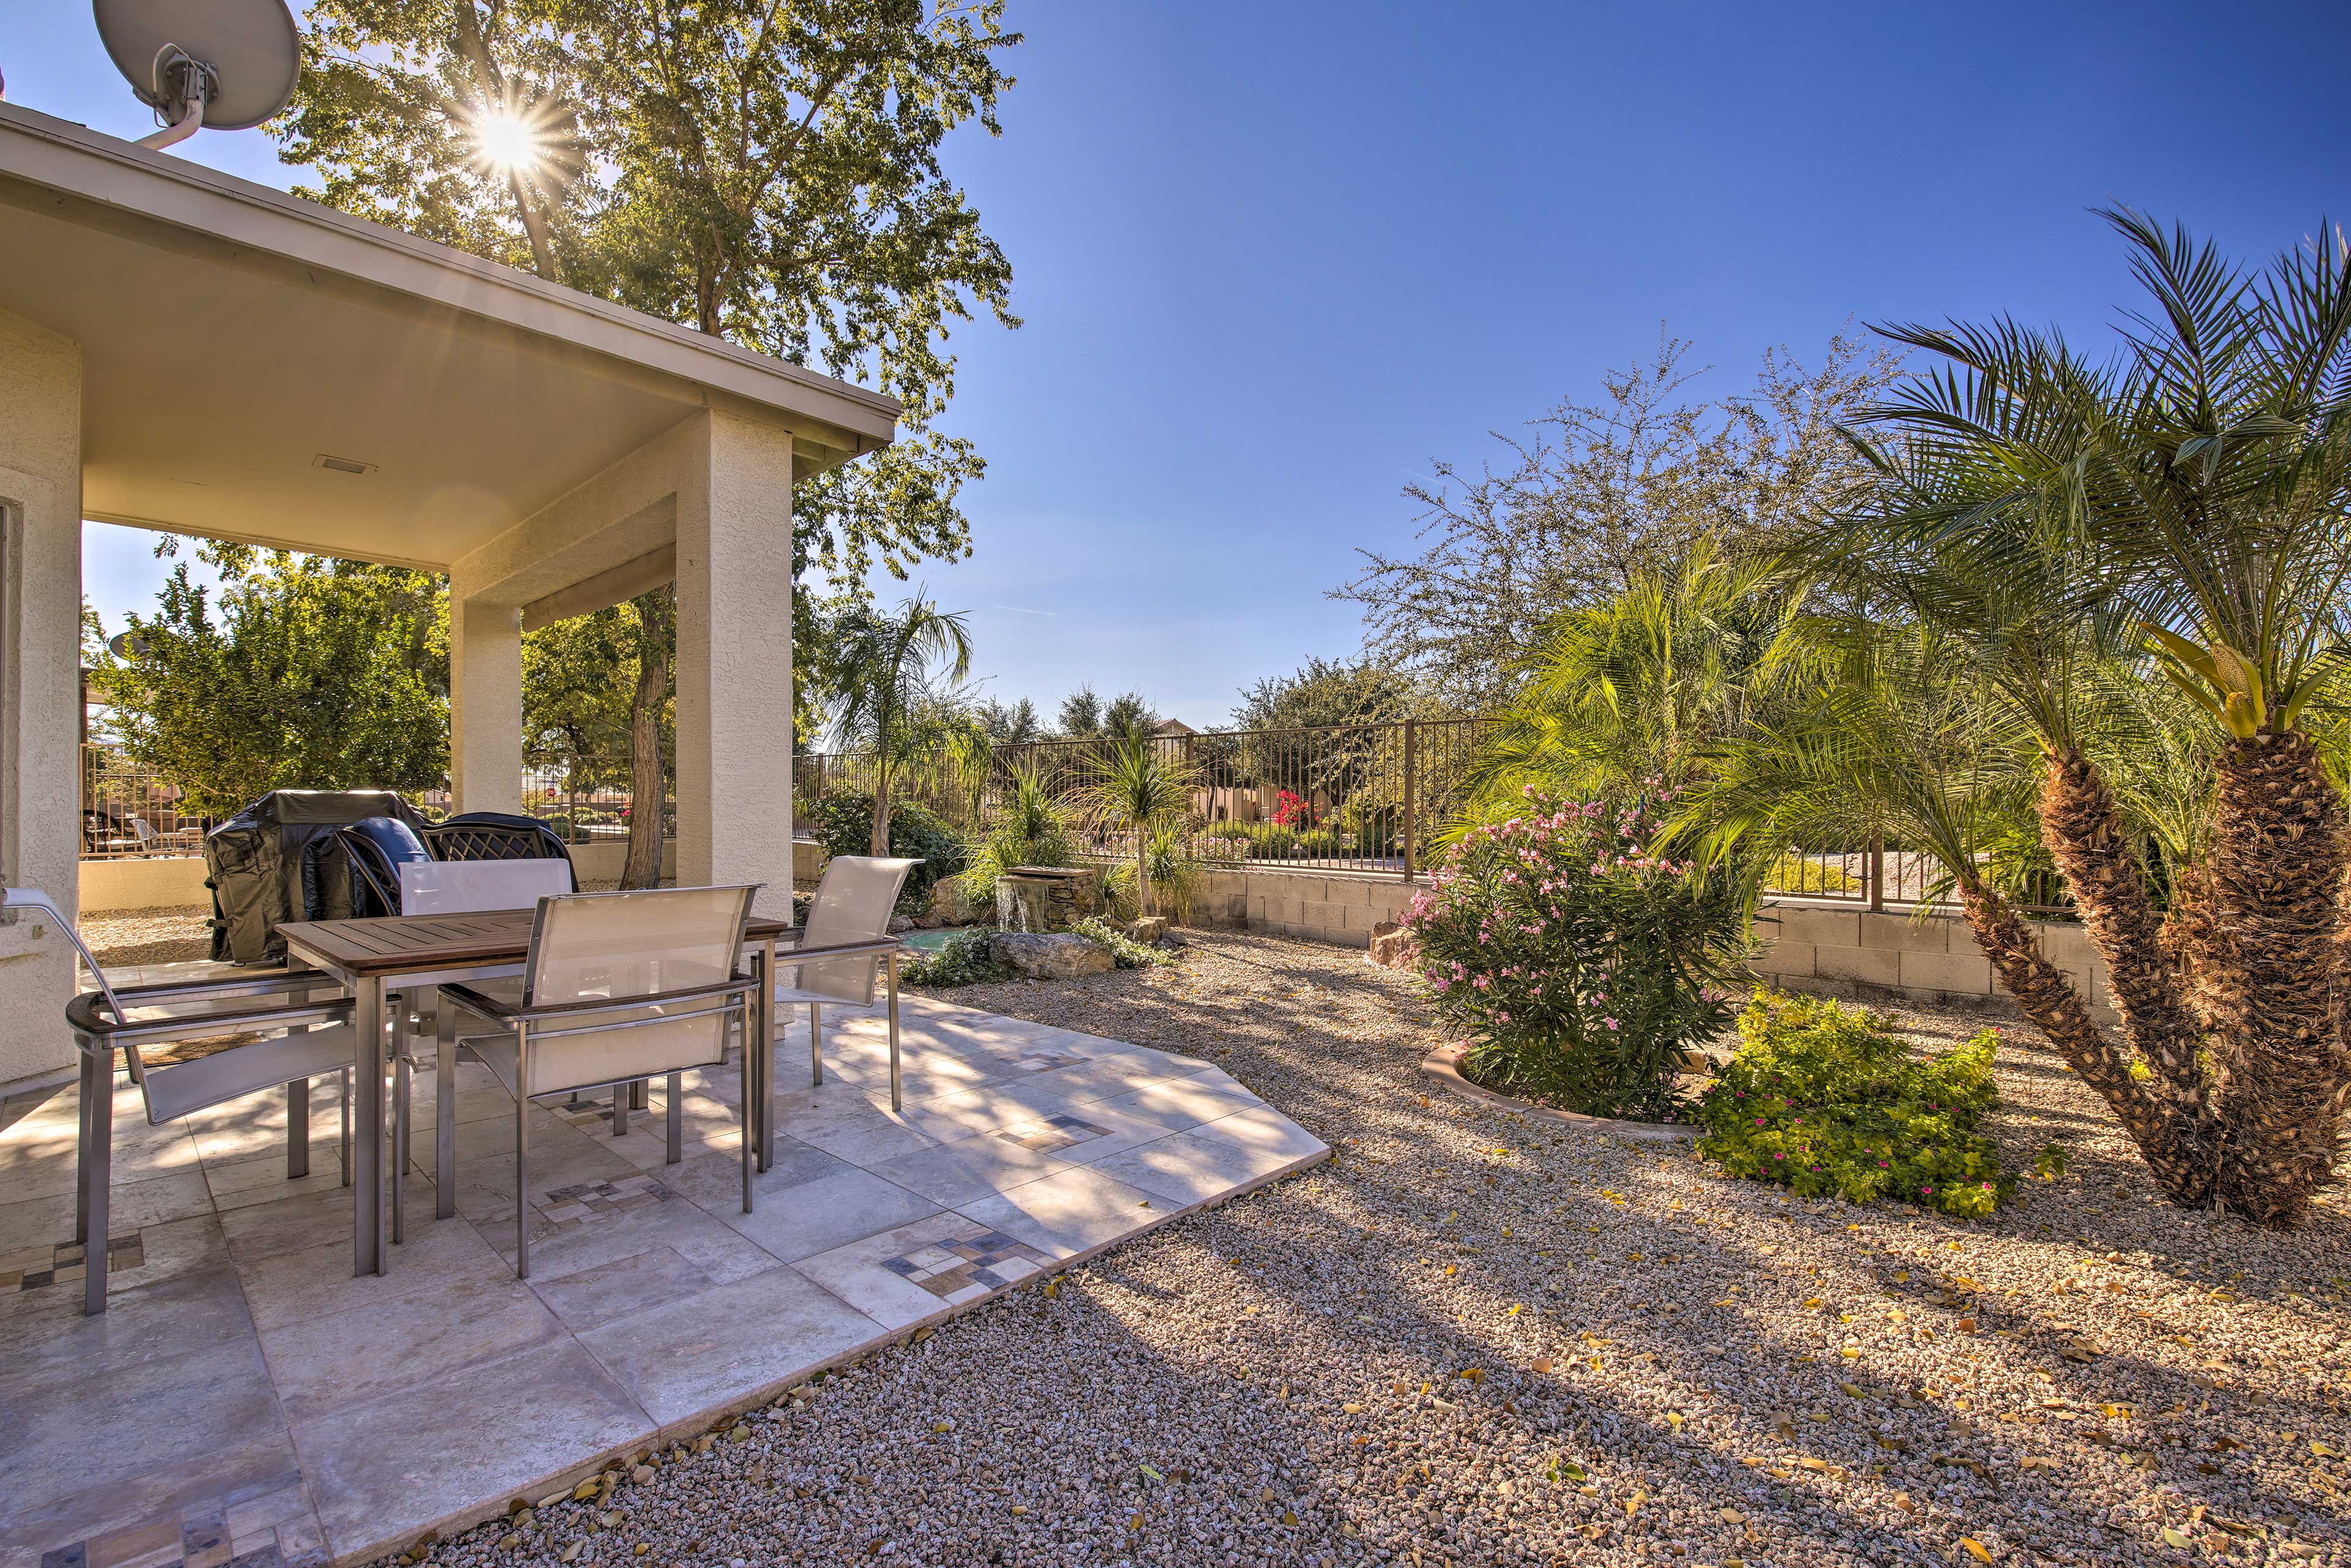 Private Backyard | Outdoor Dining Area